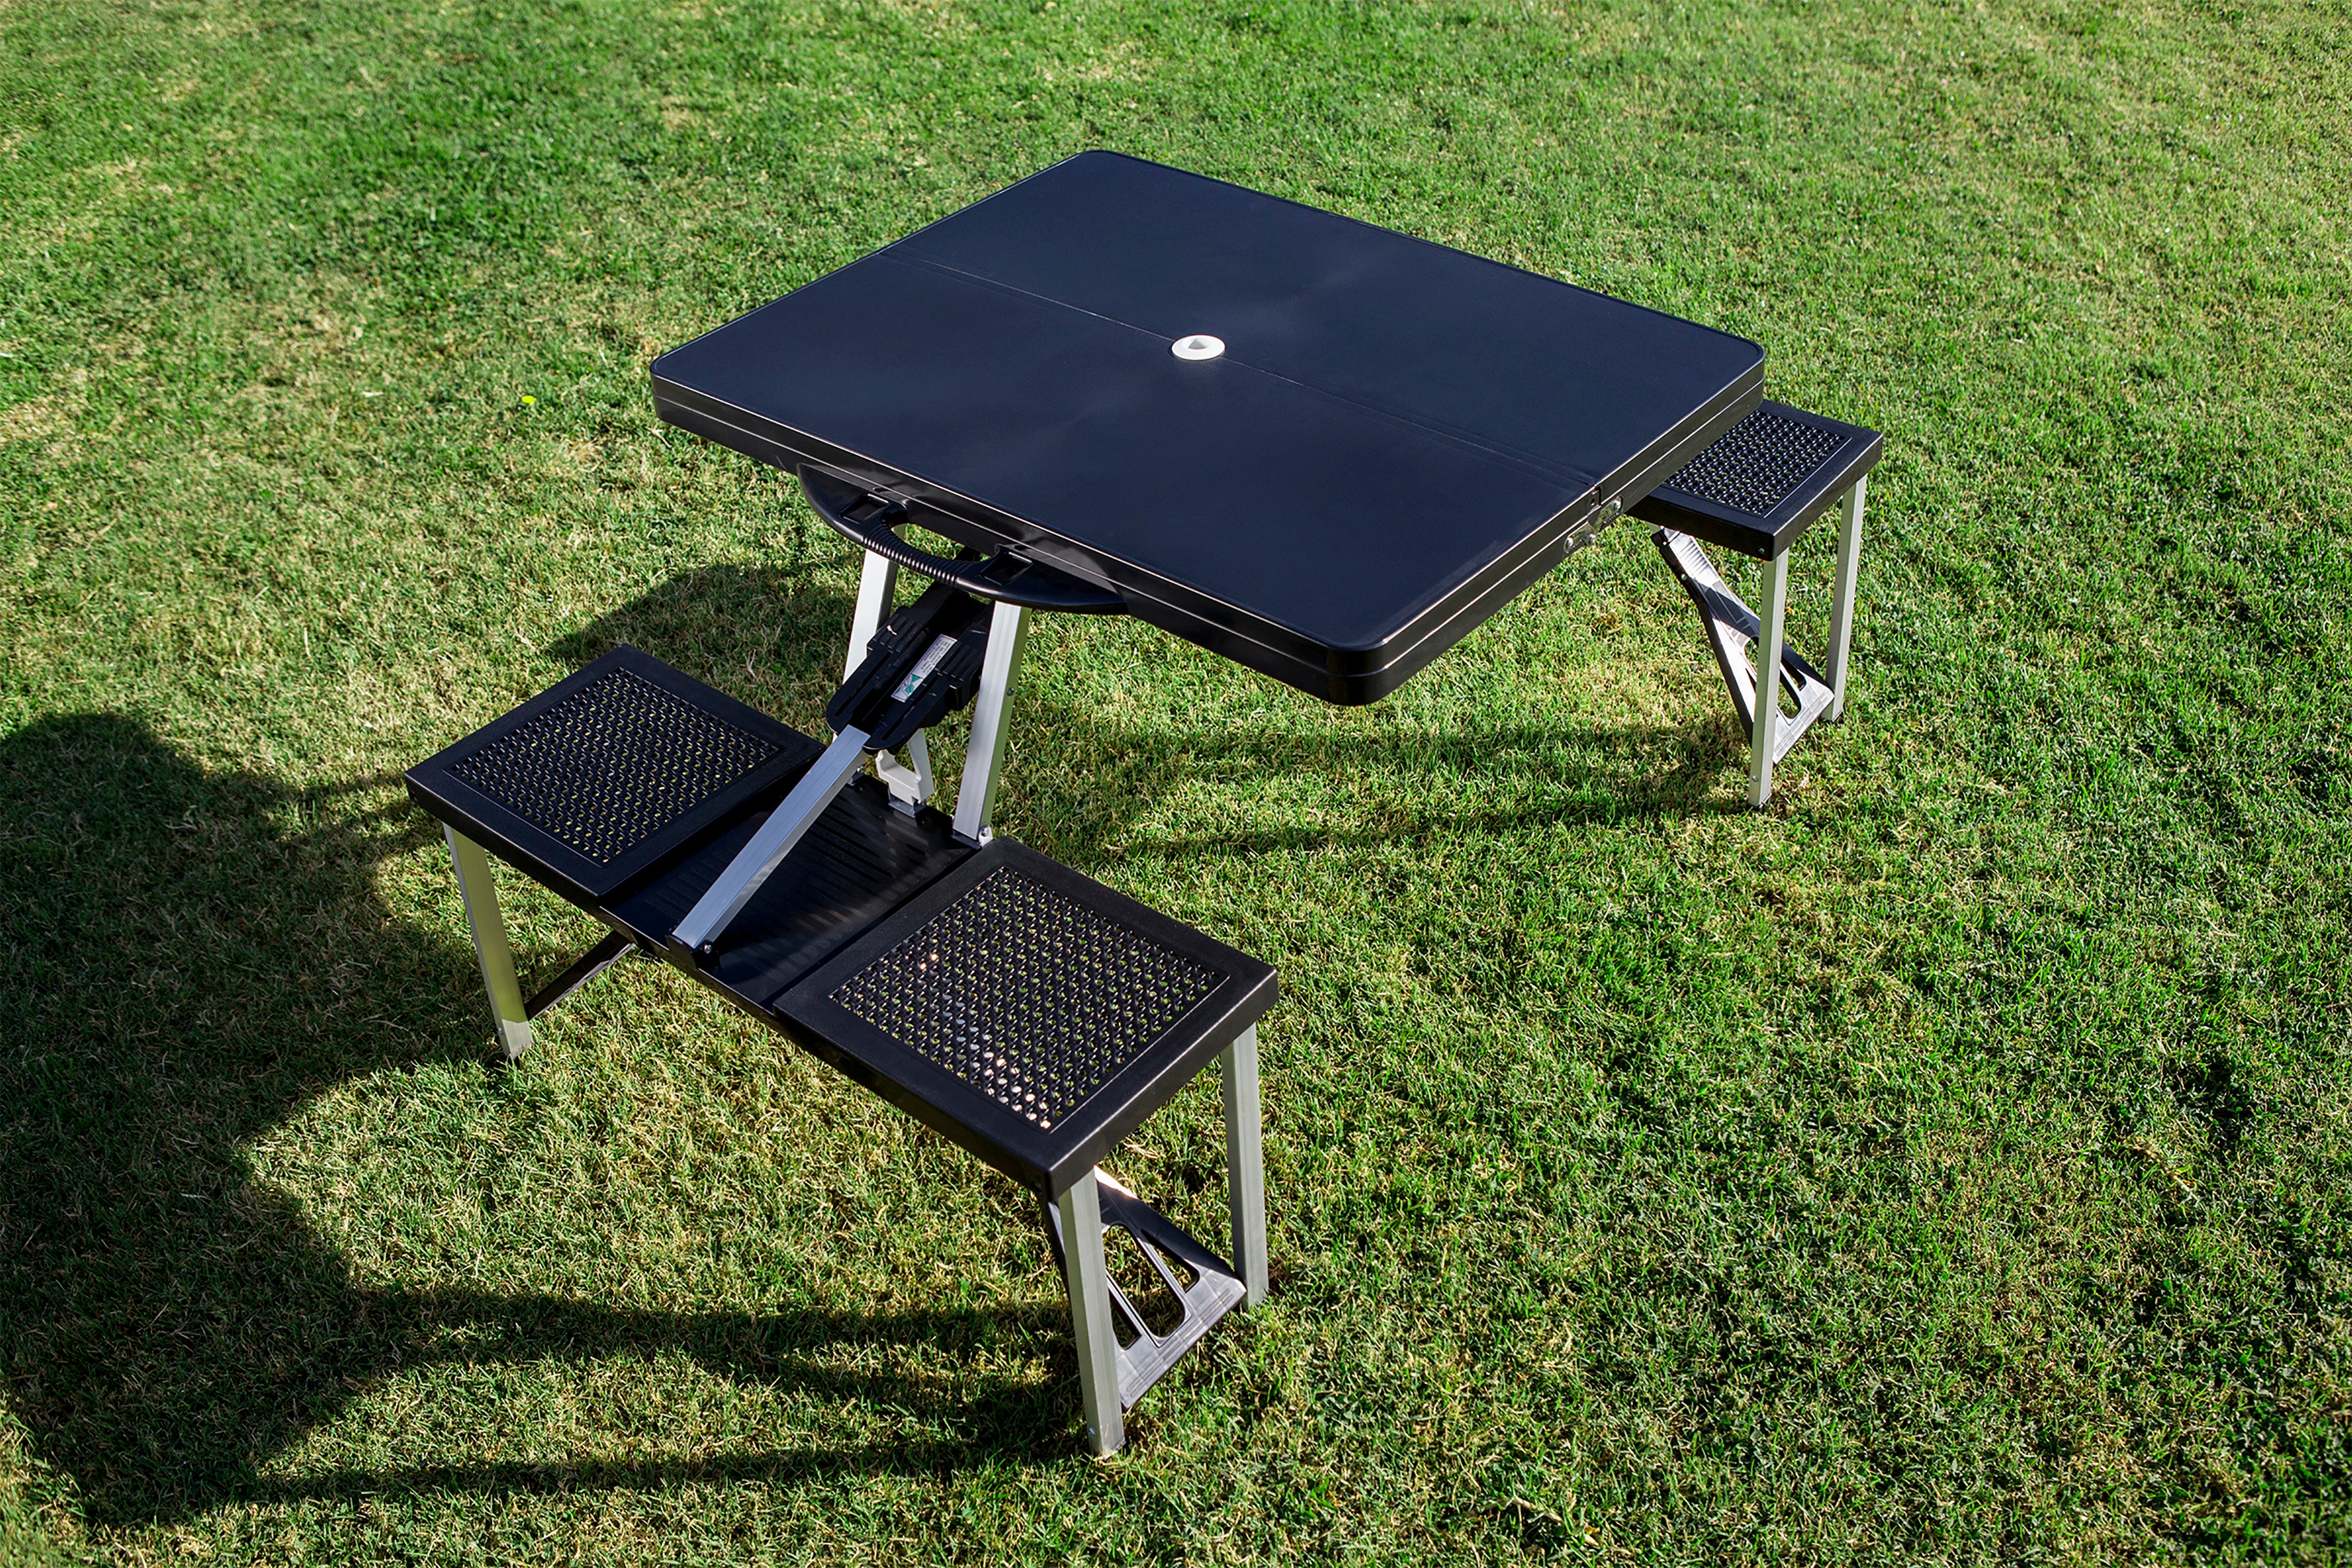 Seattle Kraken Hockey Rink - Picnic Table Portable Folding Table with Seats